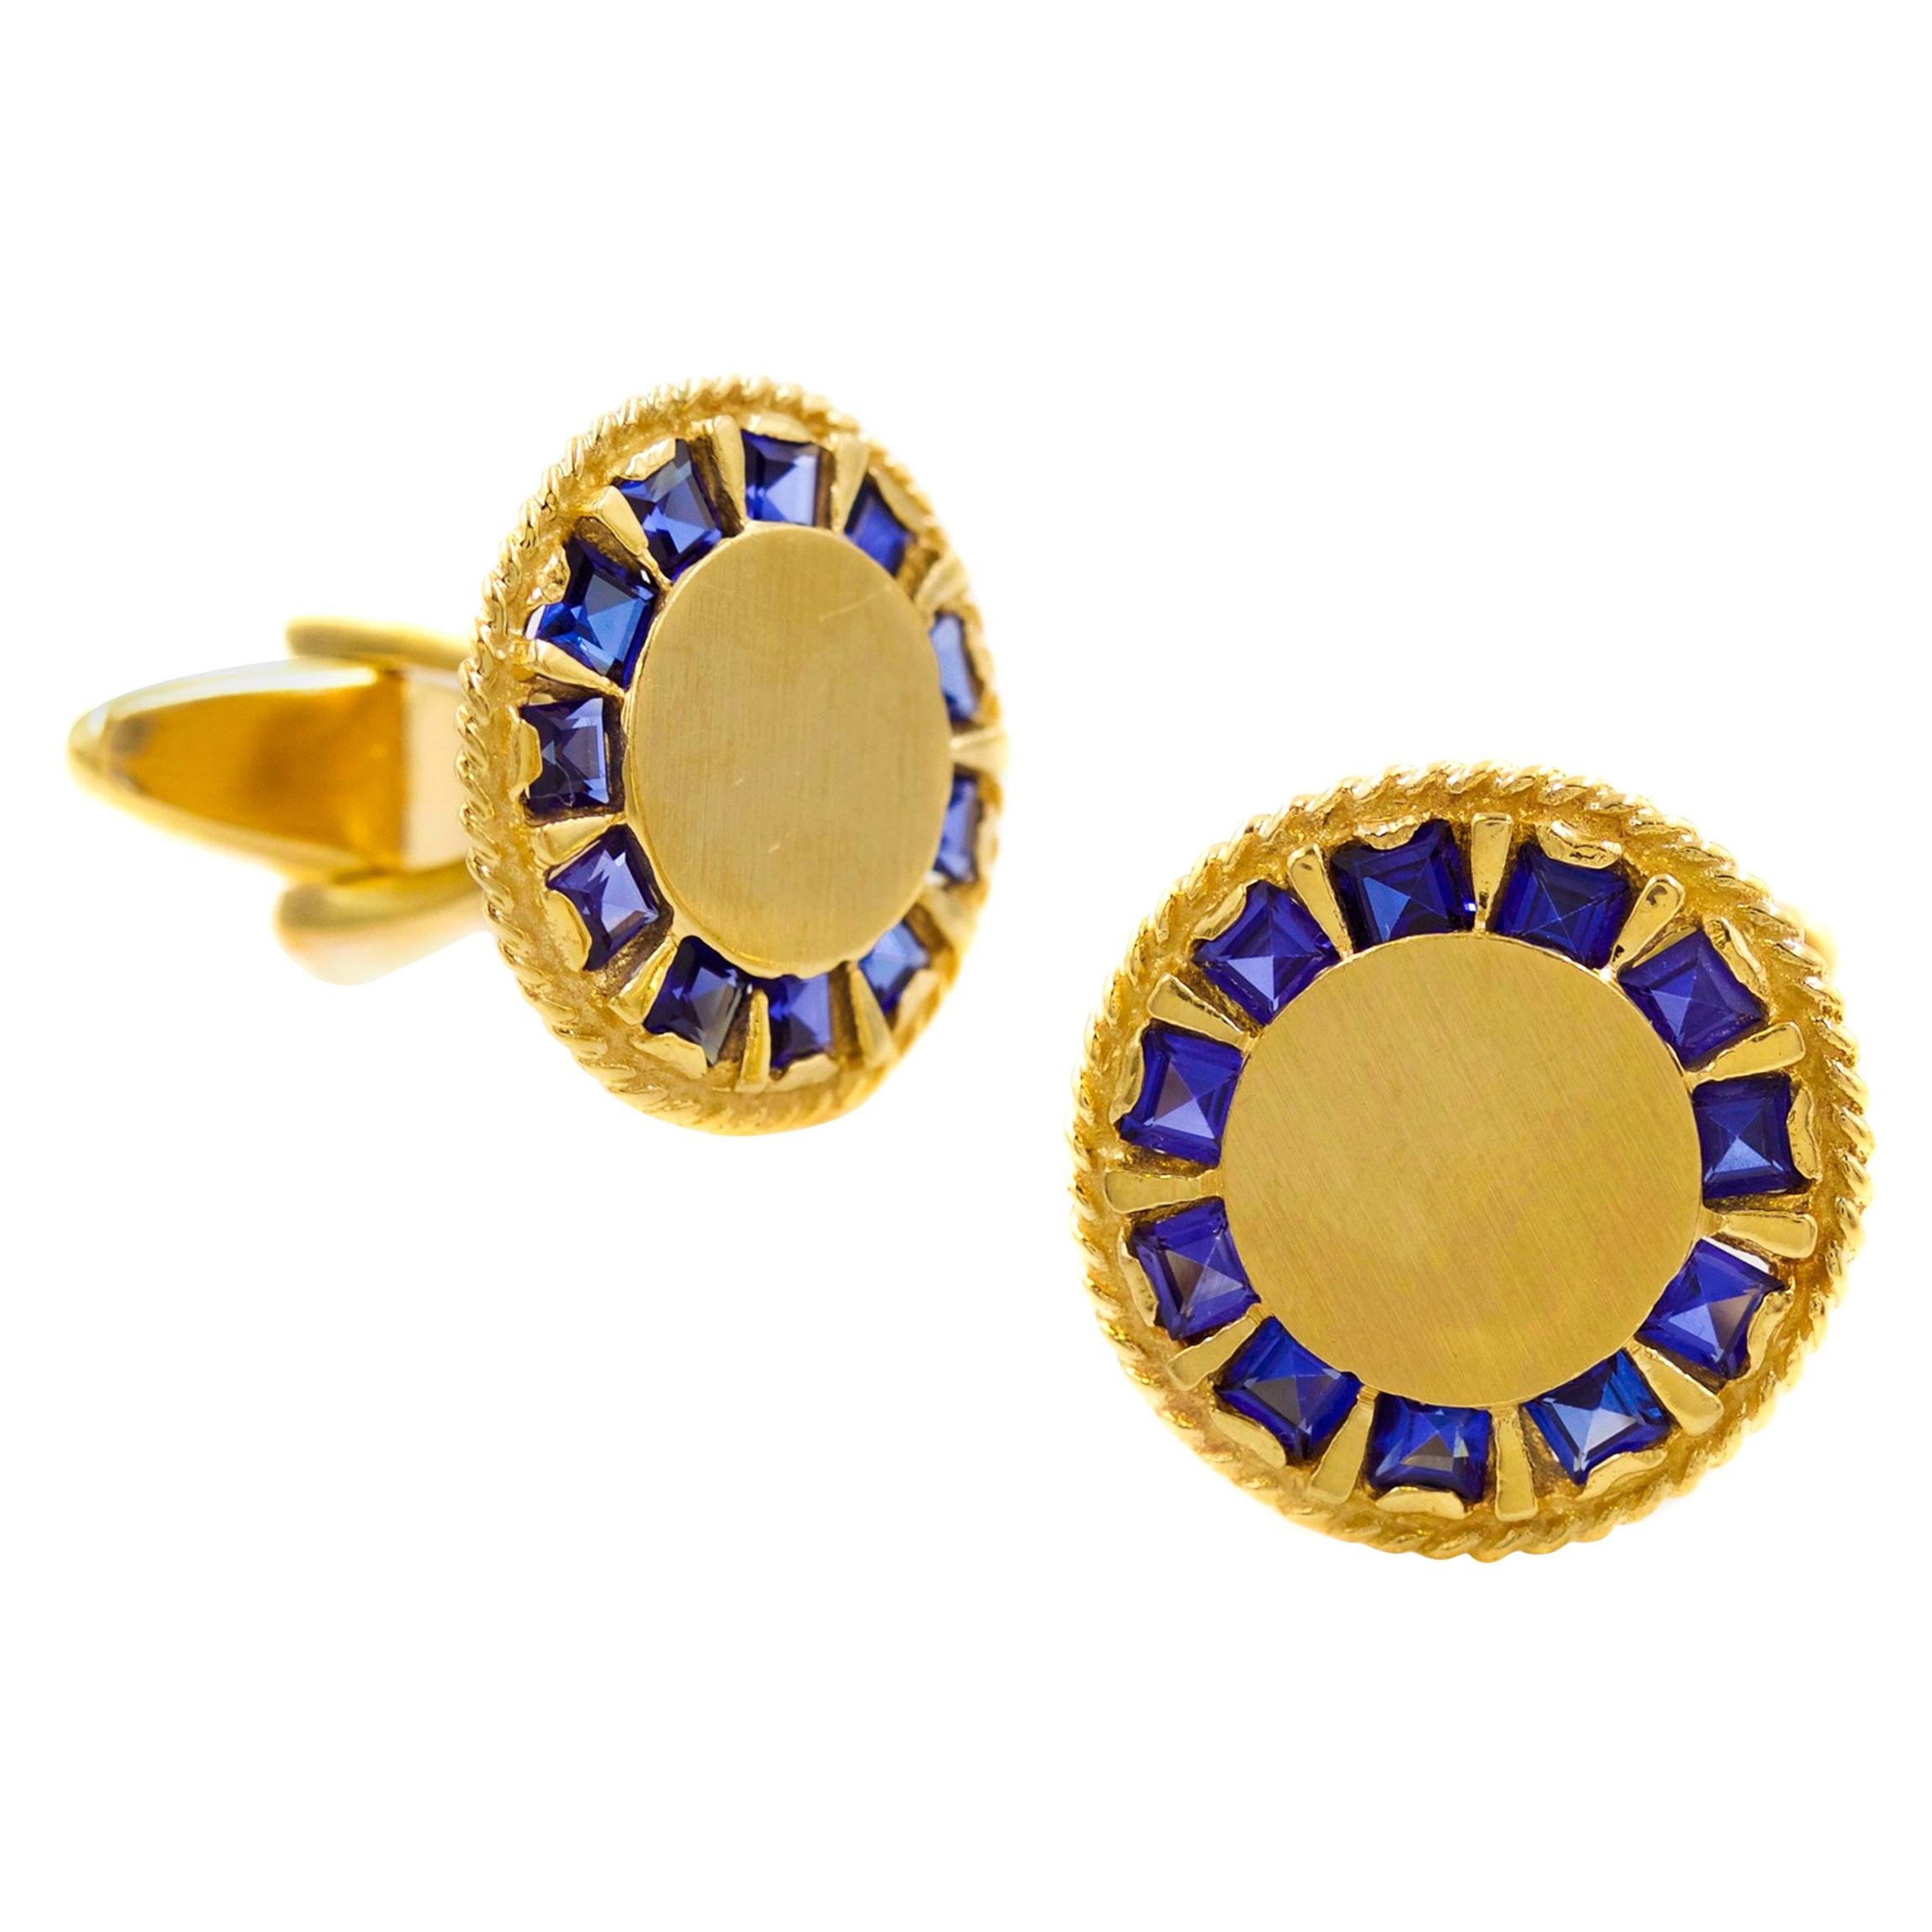 Pair of Modernist Brushed 14k Gold & Sapphire Cufflinks, Lucien Piccard, c. 1950